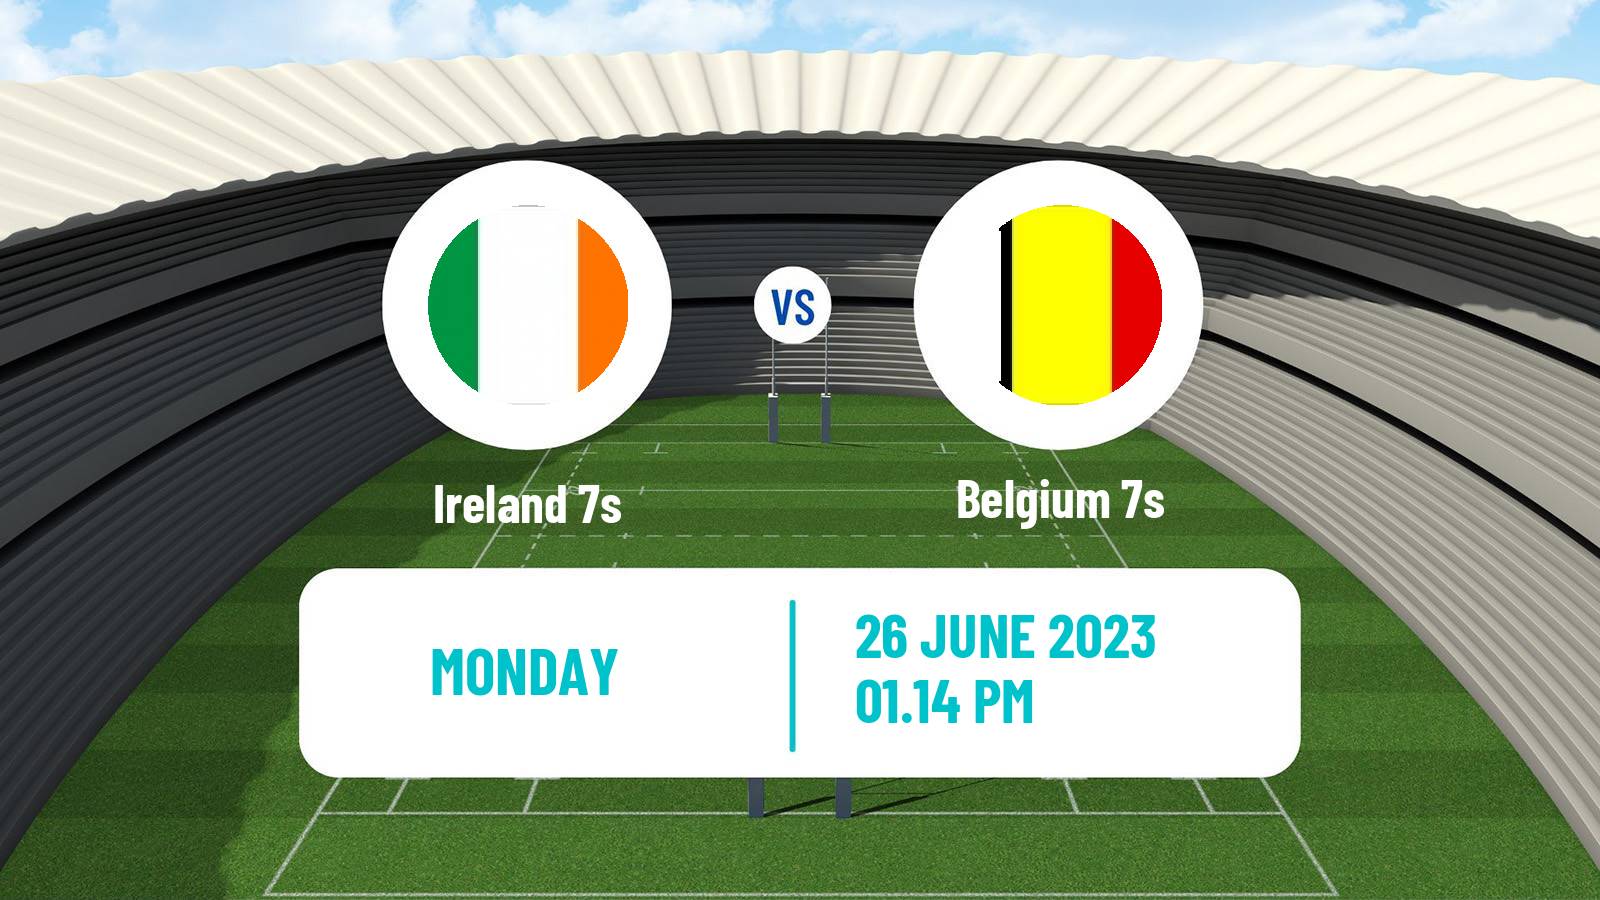 Rugby union European Games 7s Rugby Ireland 7s - Belgium 7s